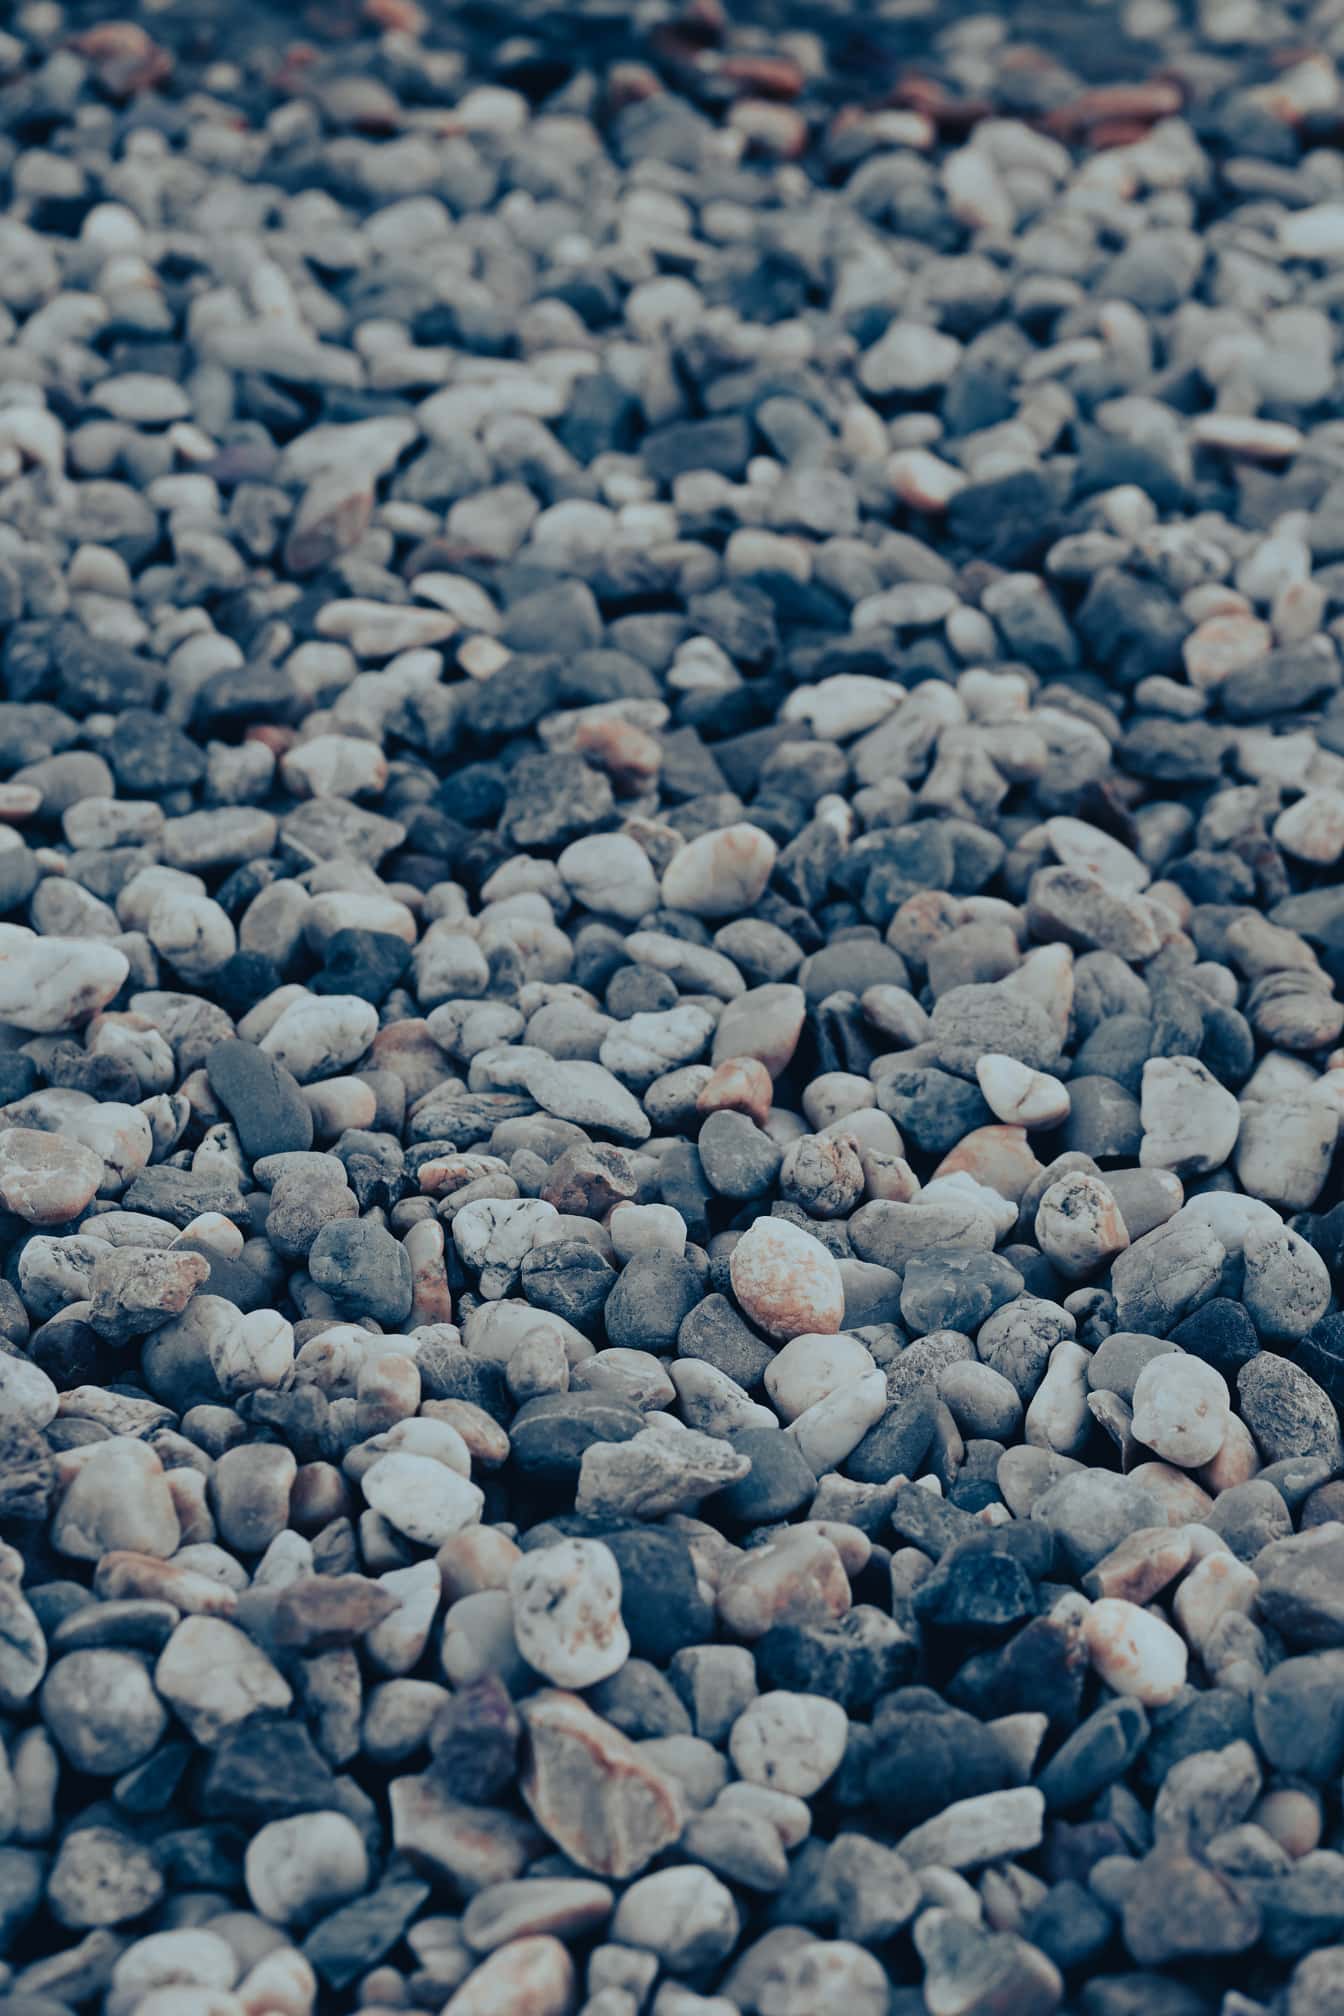 Pebbles on ground texture close-up